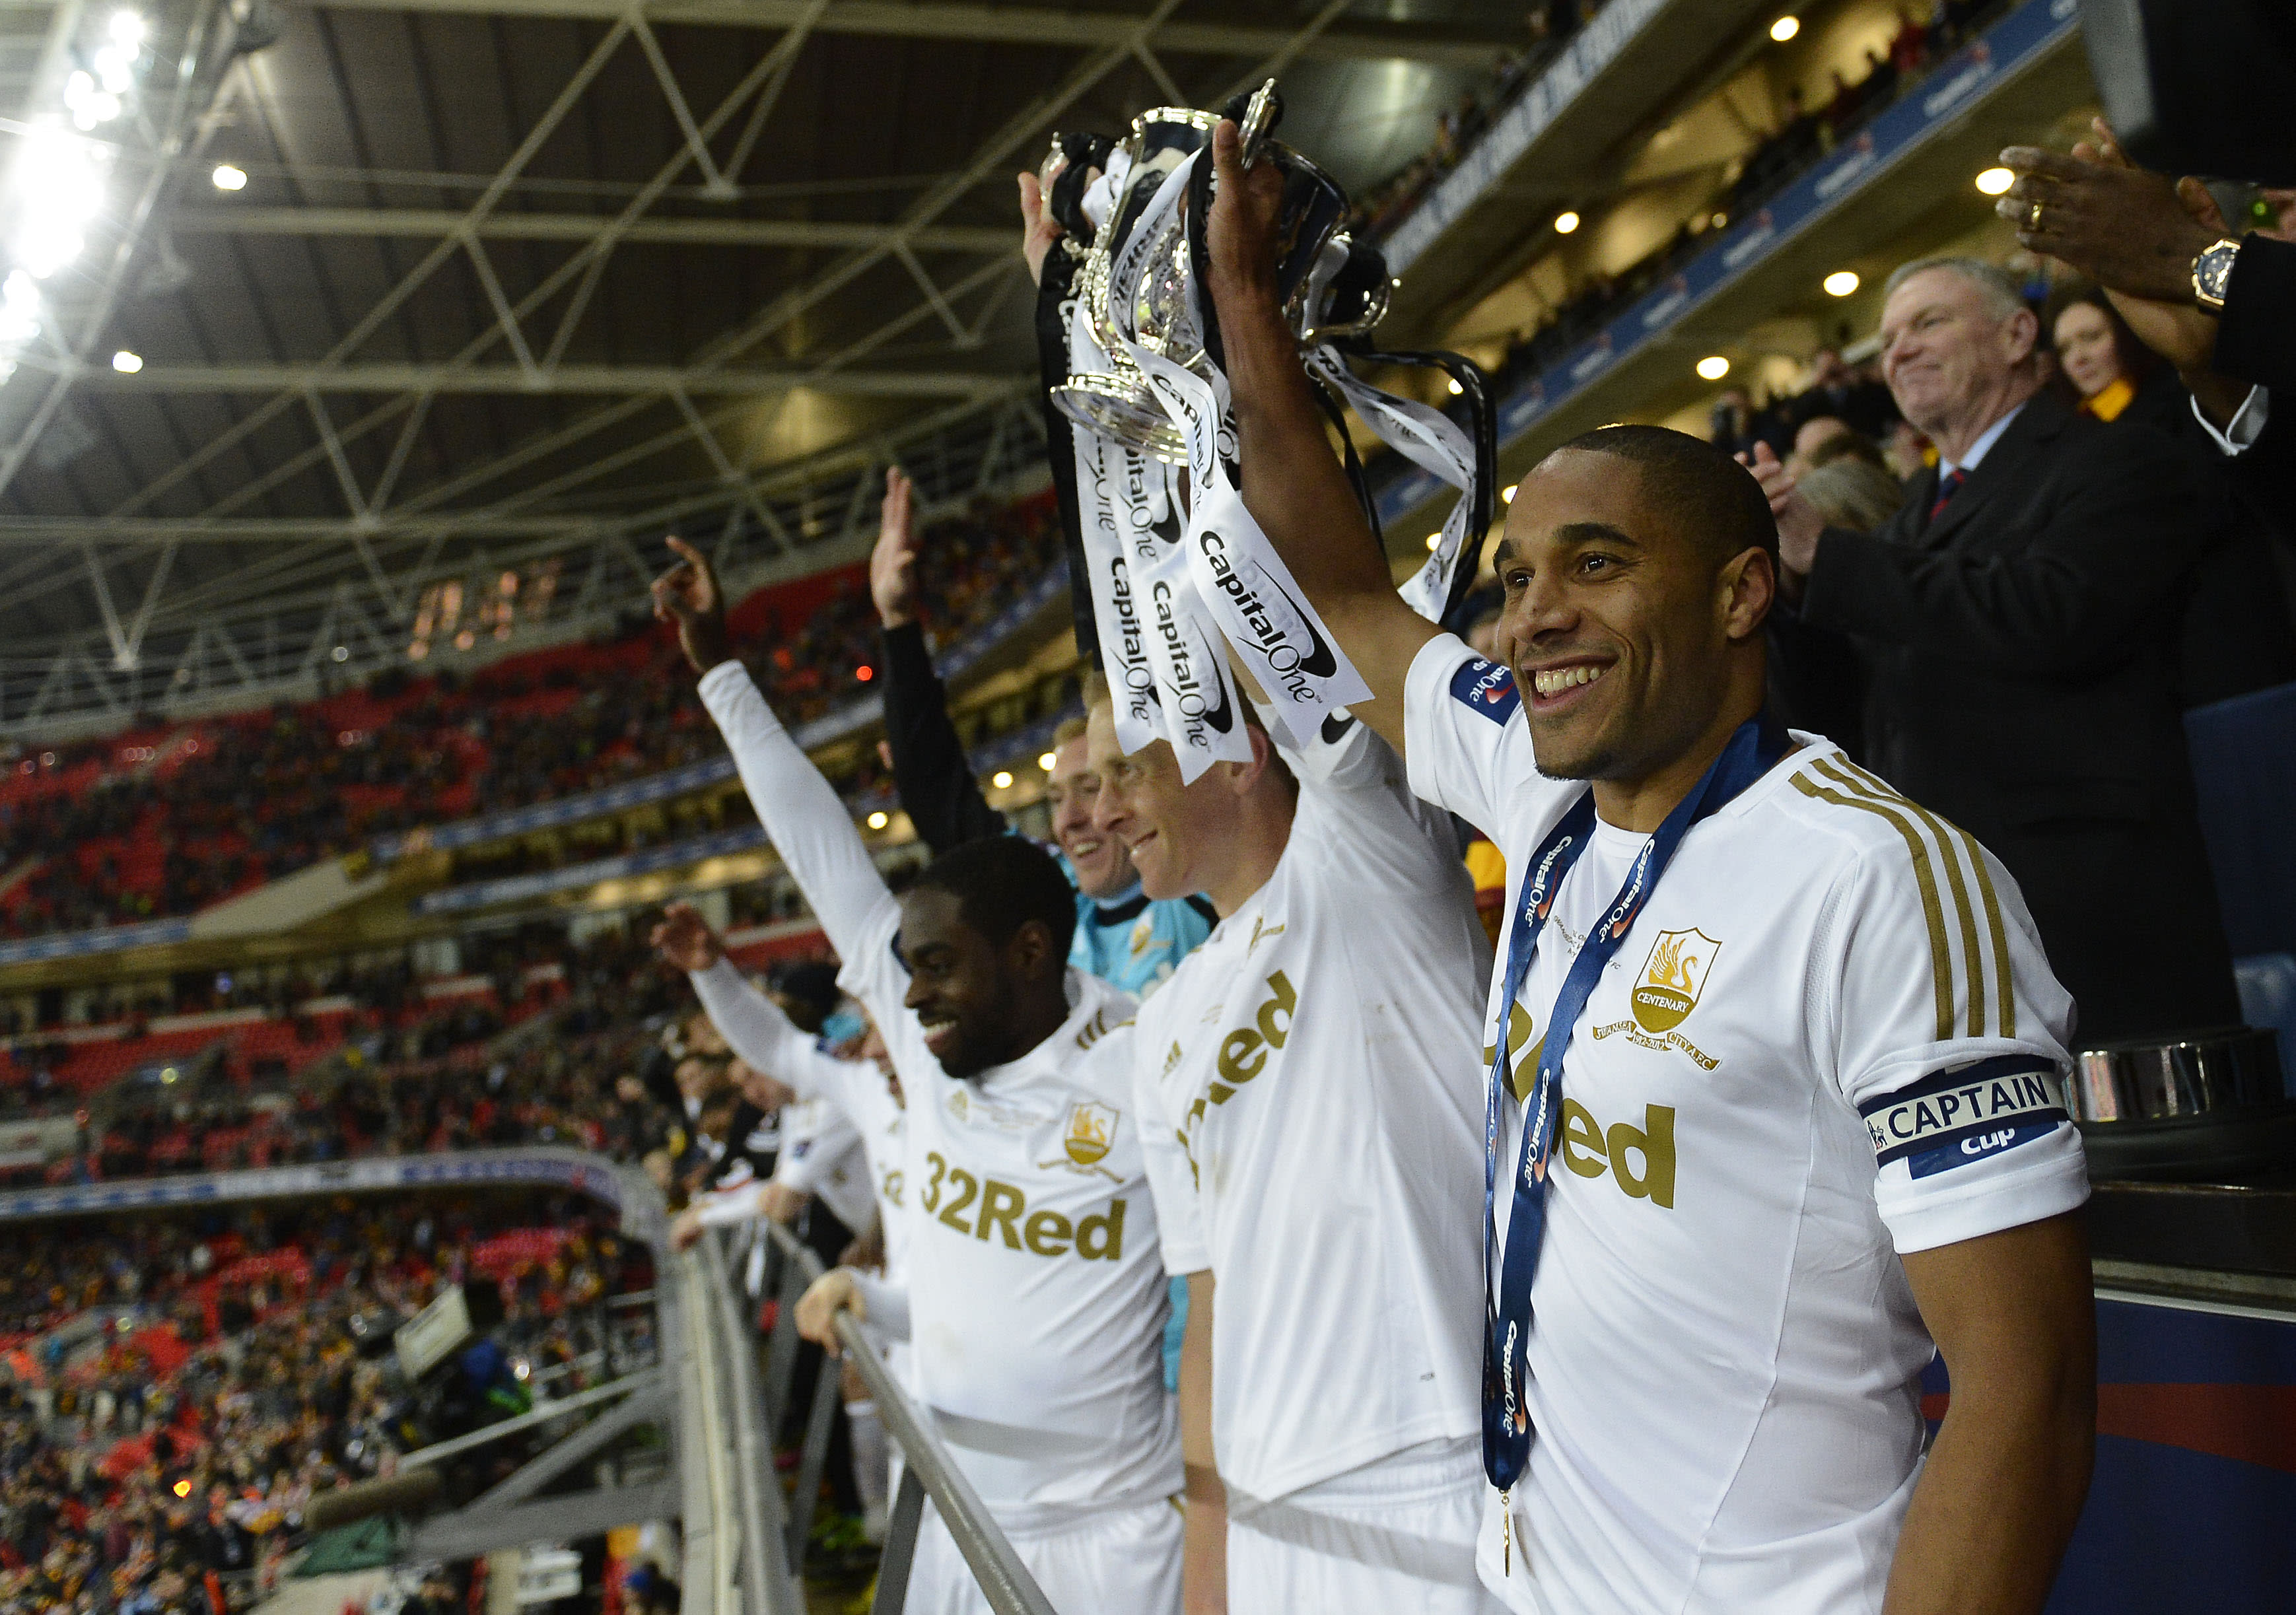 Swansea City Fan View: Remembering the League Cup fondly